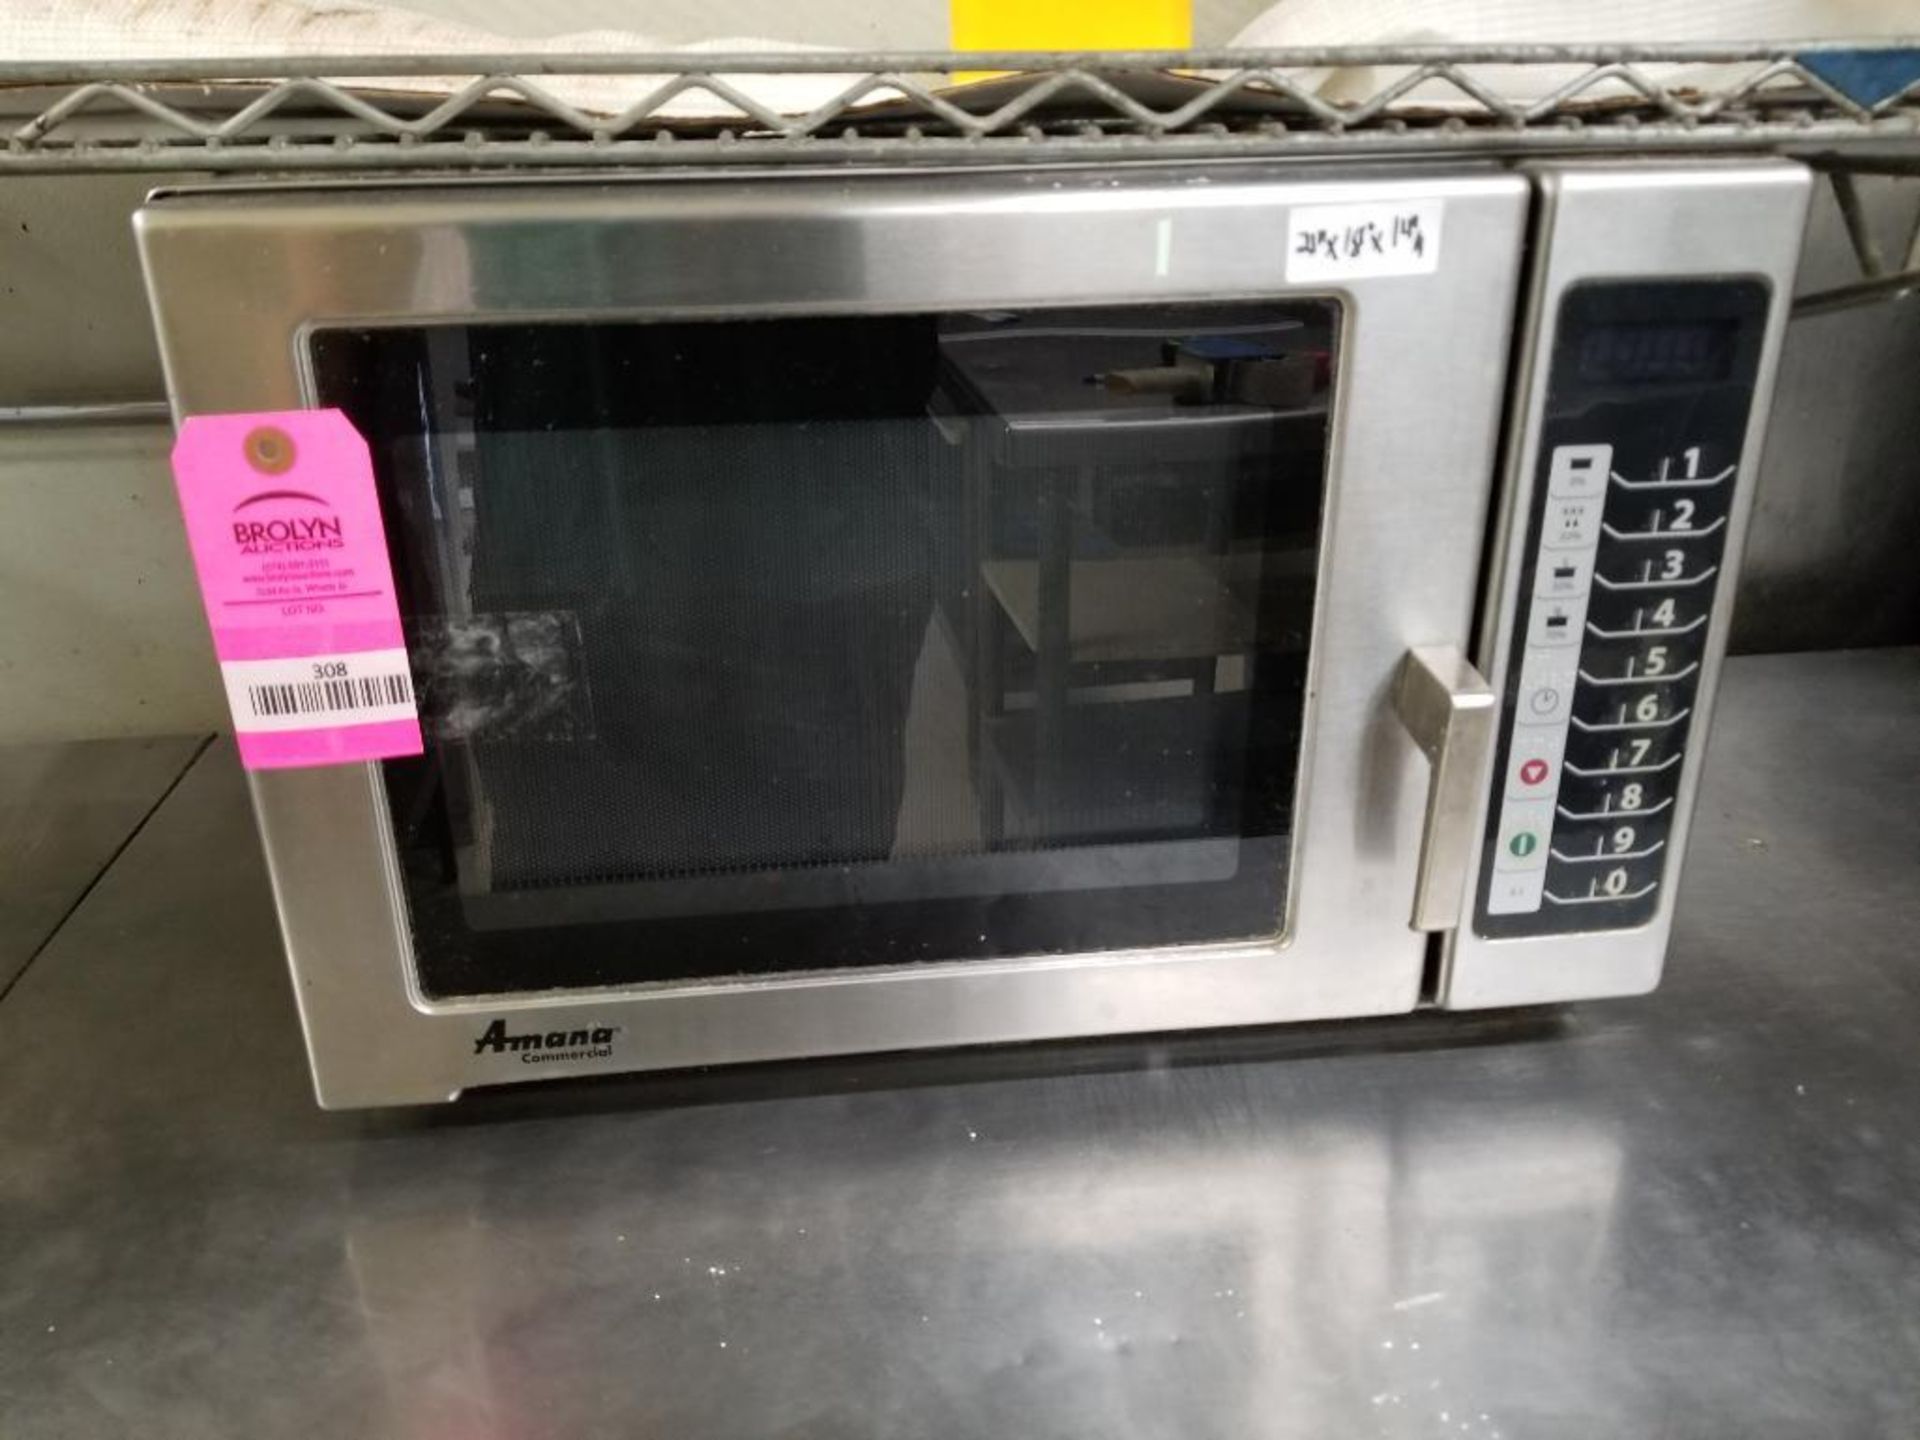 Amana commercial microwave.